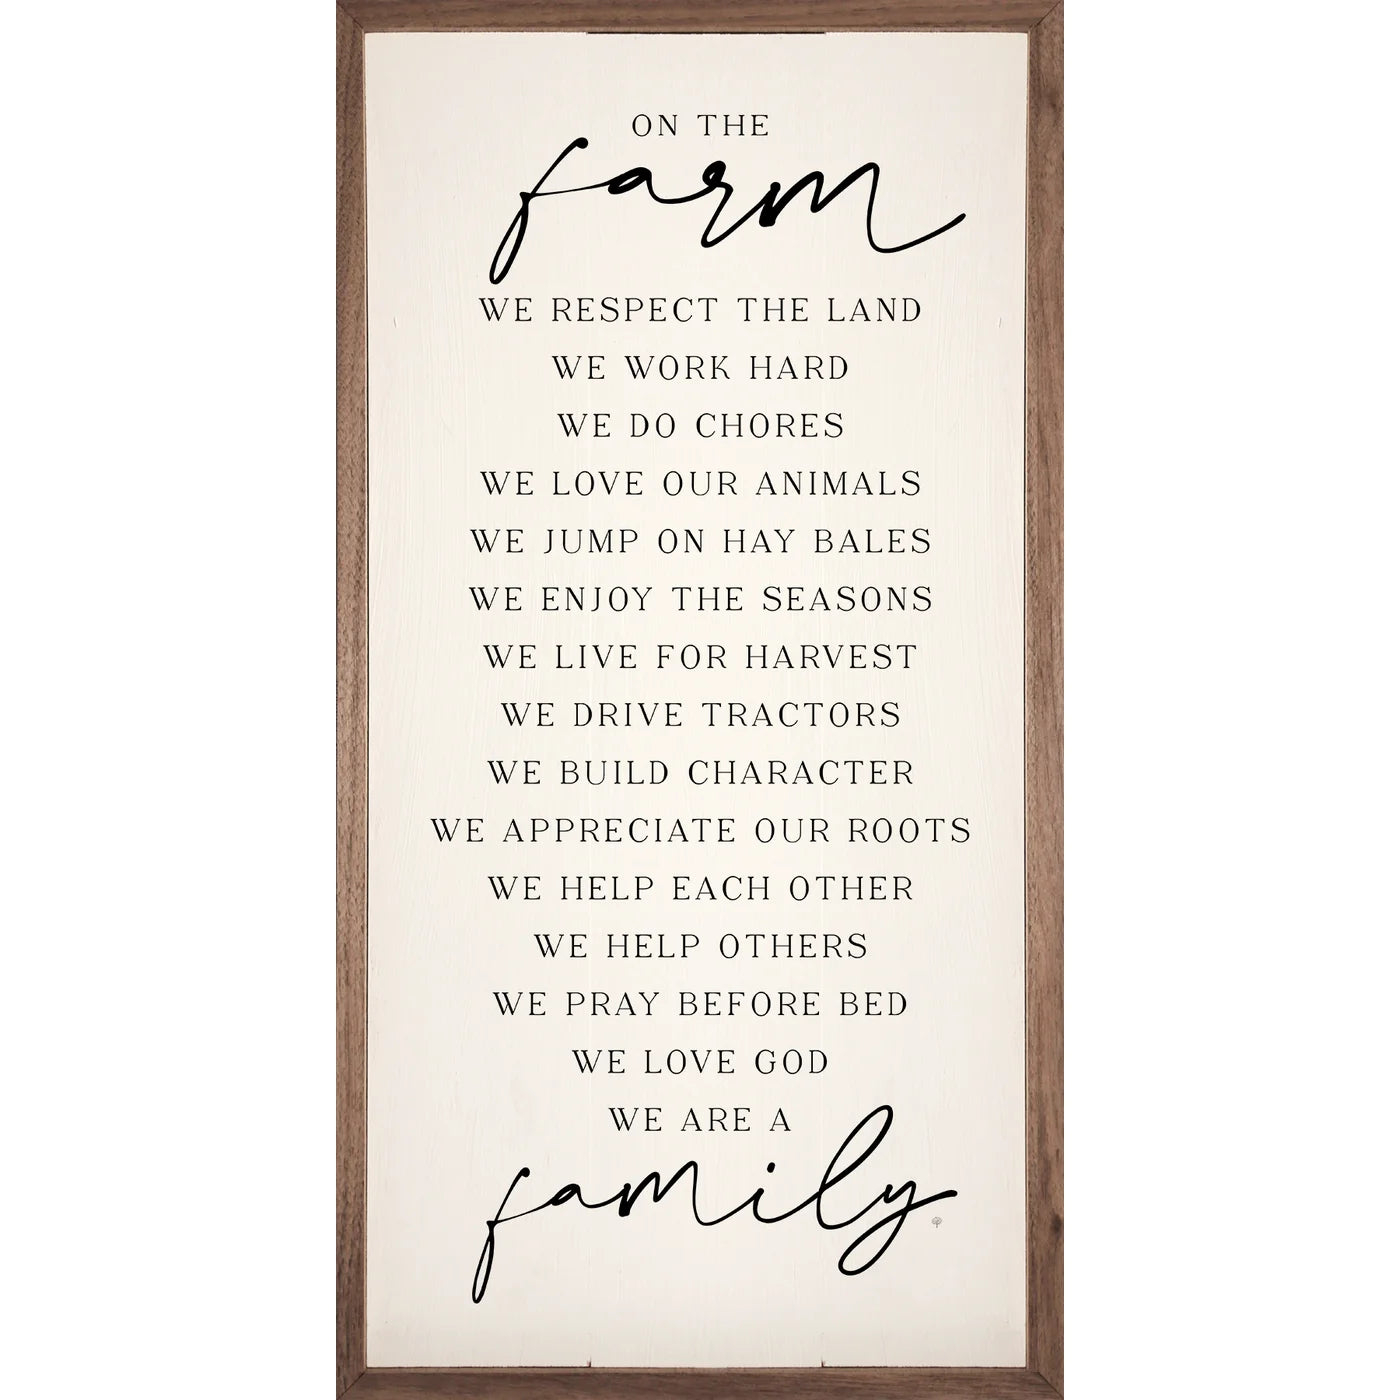 On The Farm We Are Family Wood Framed Print